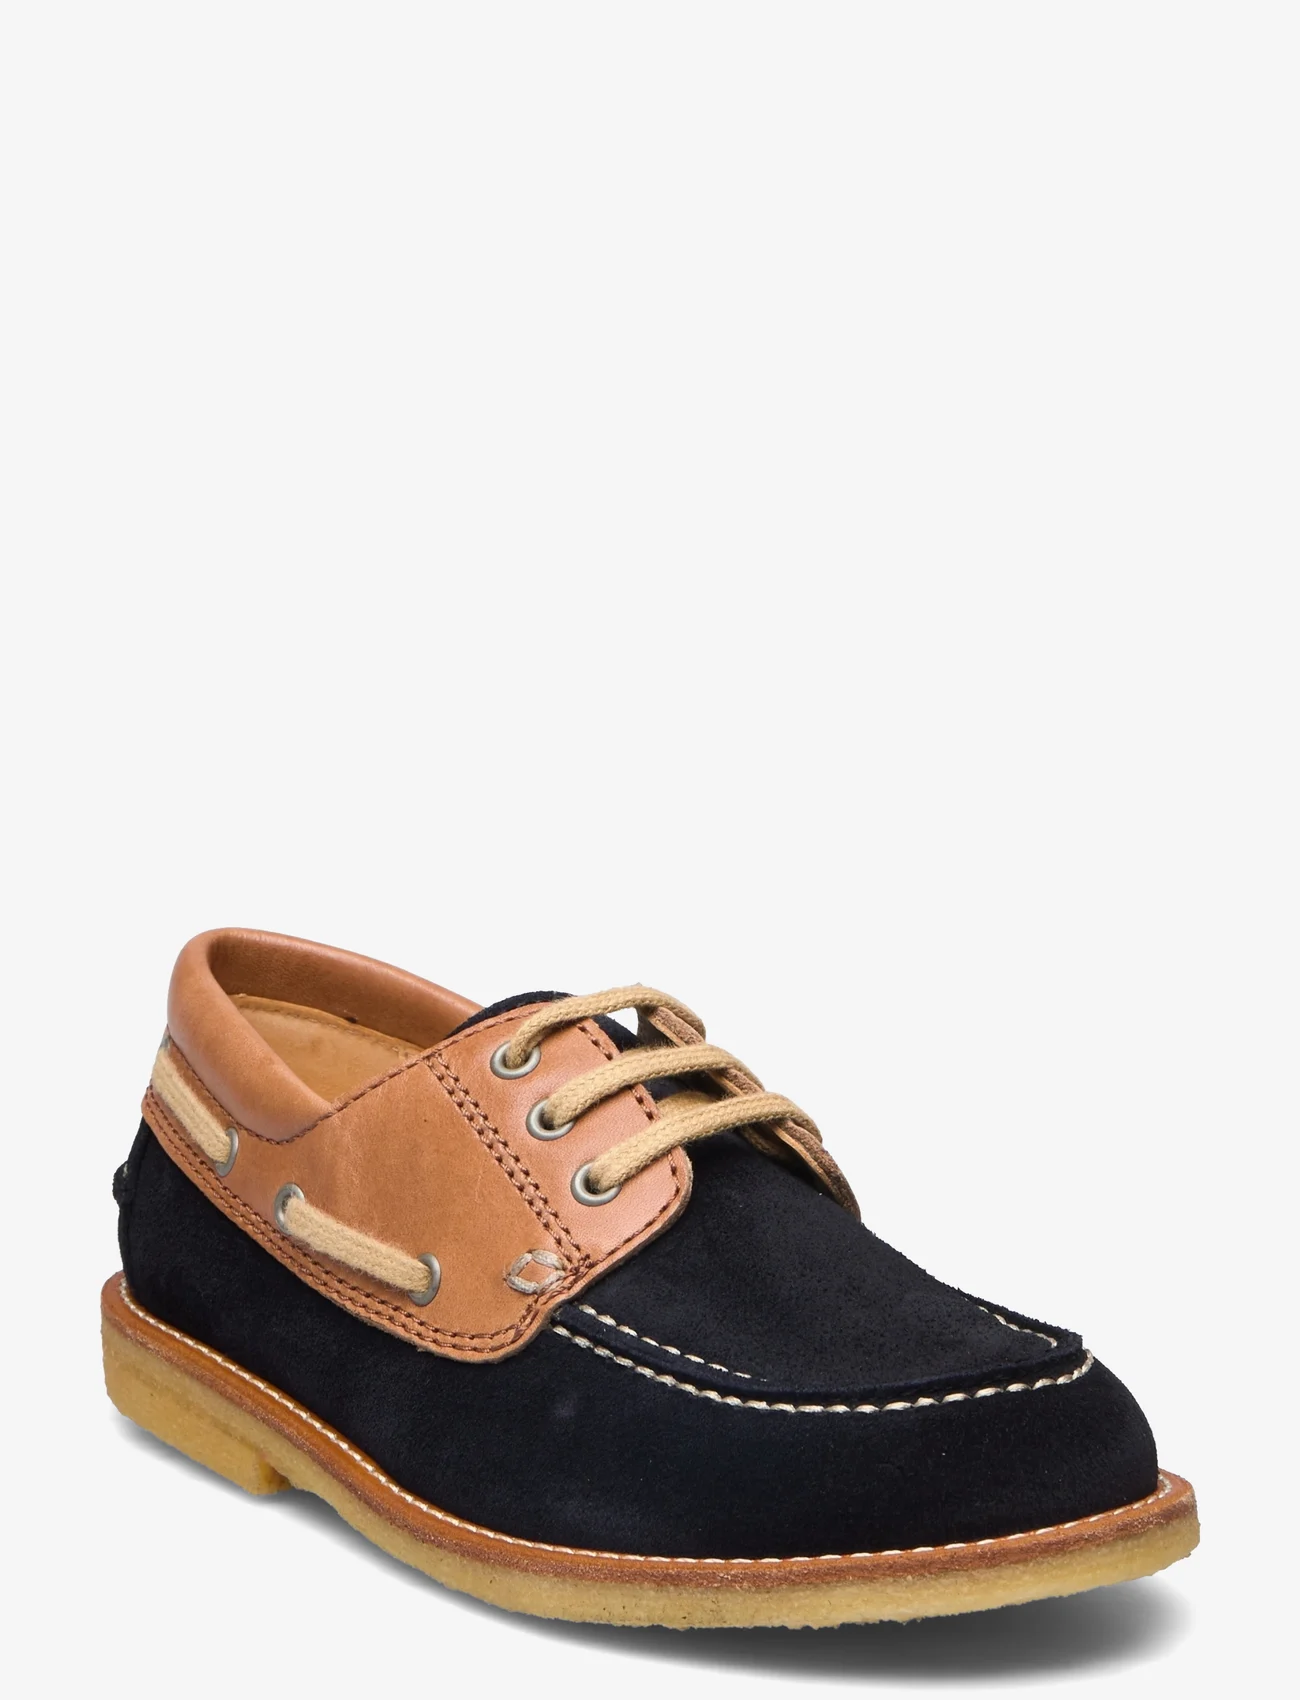 ANGULUS - Shoes - flat - with lace - kids - 2215/1789 navy/cognac - 0